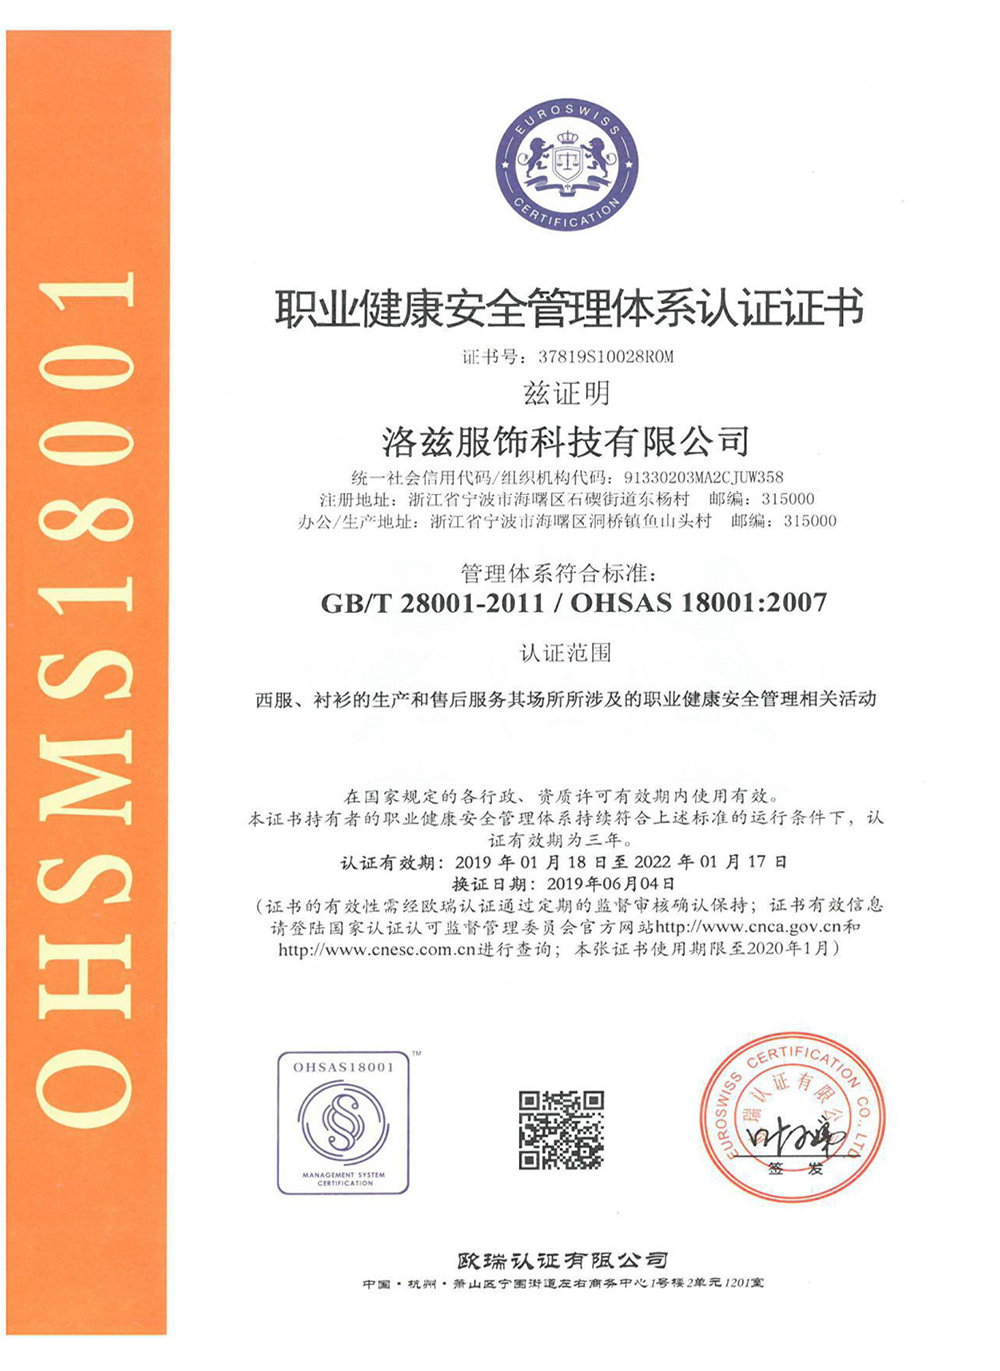 Occupational health and safety management system certificate